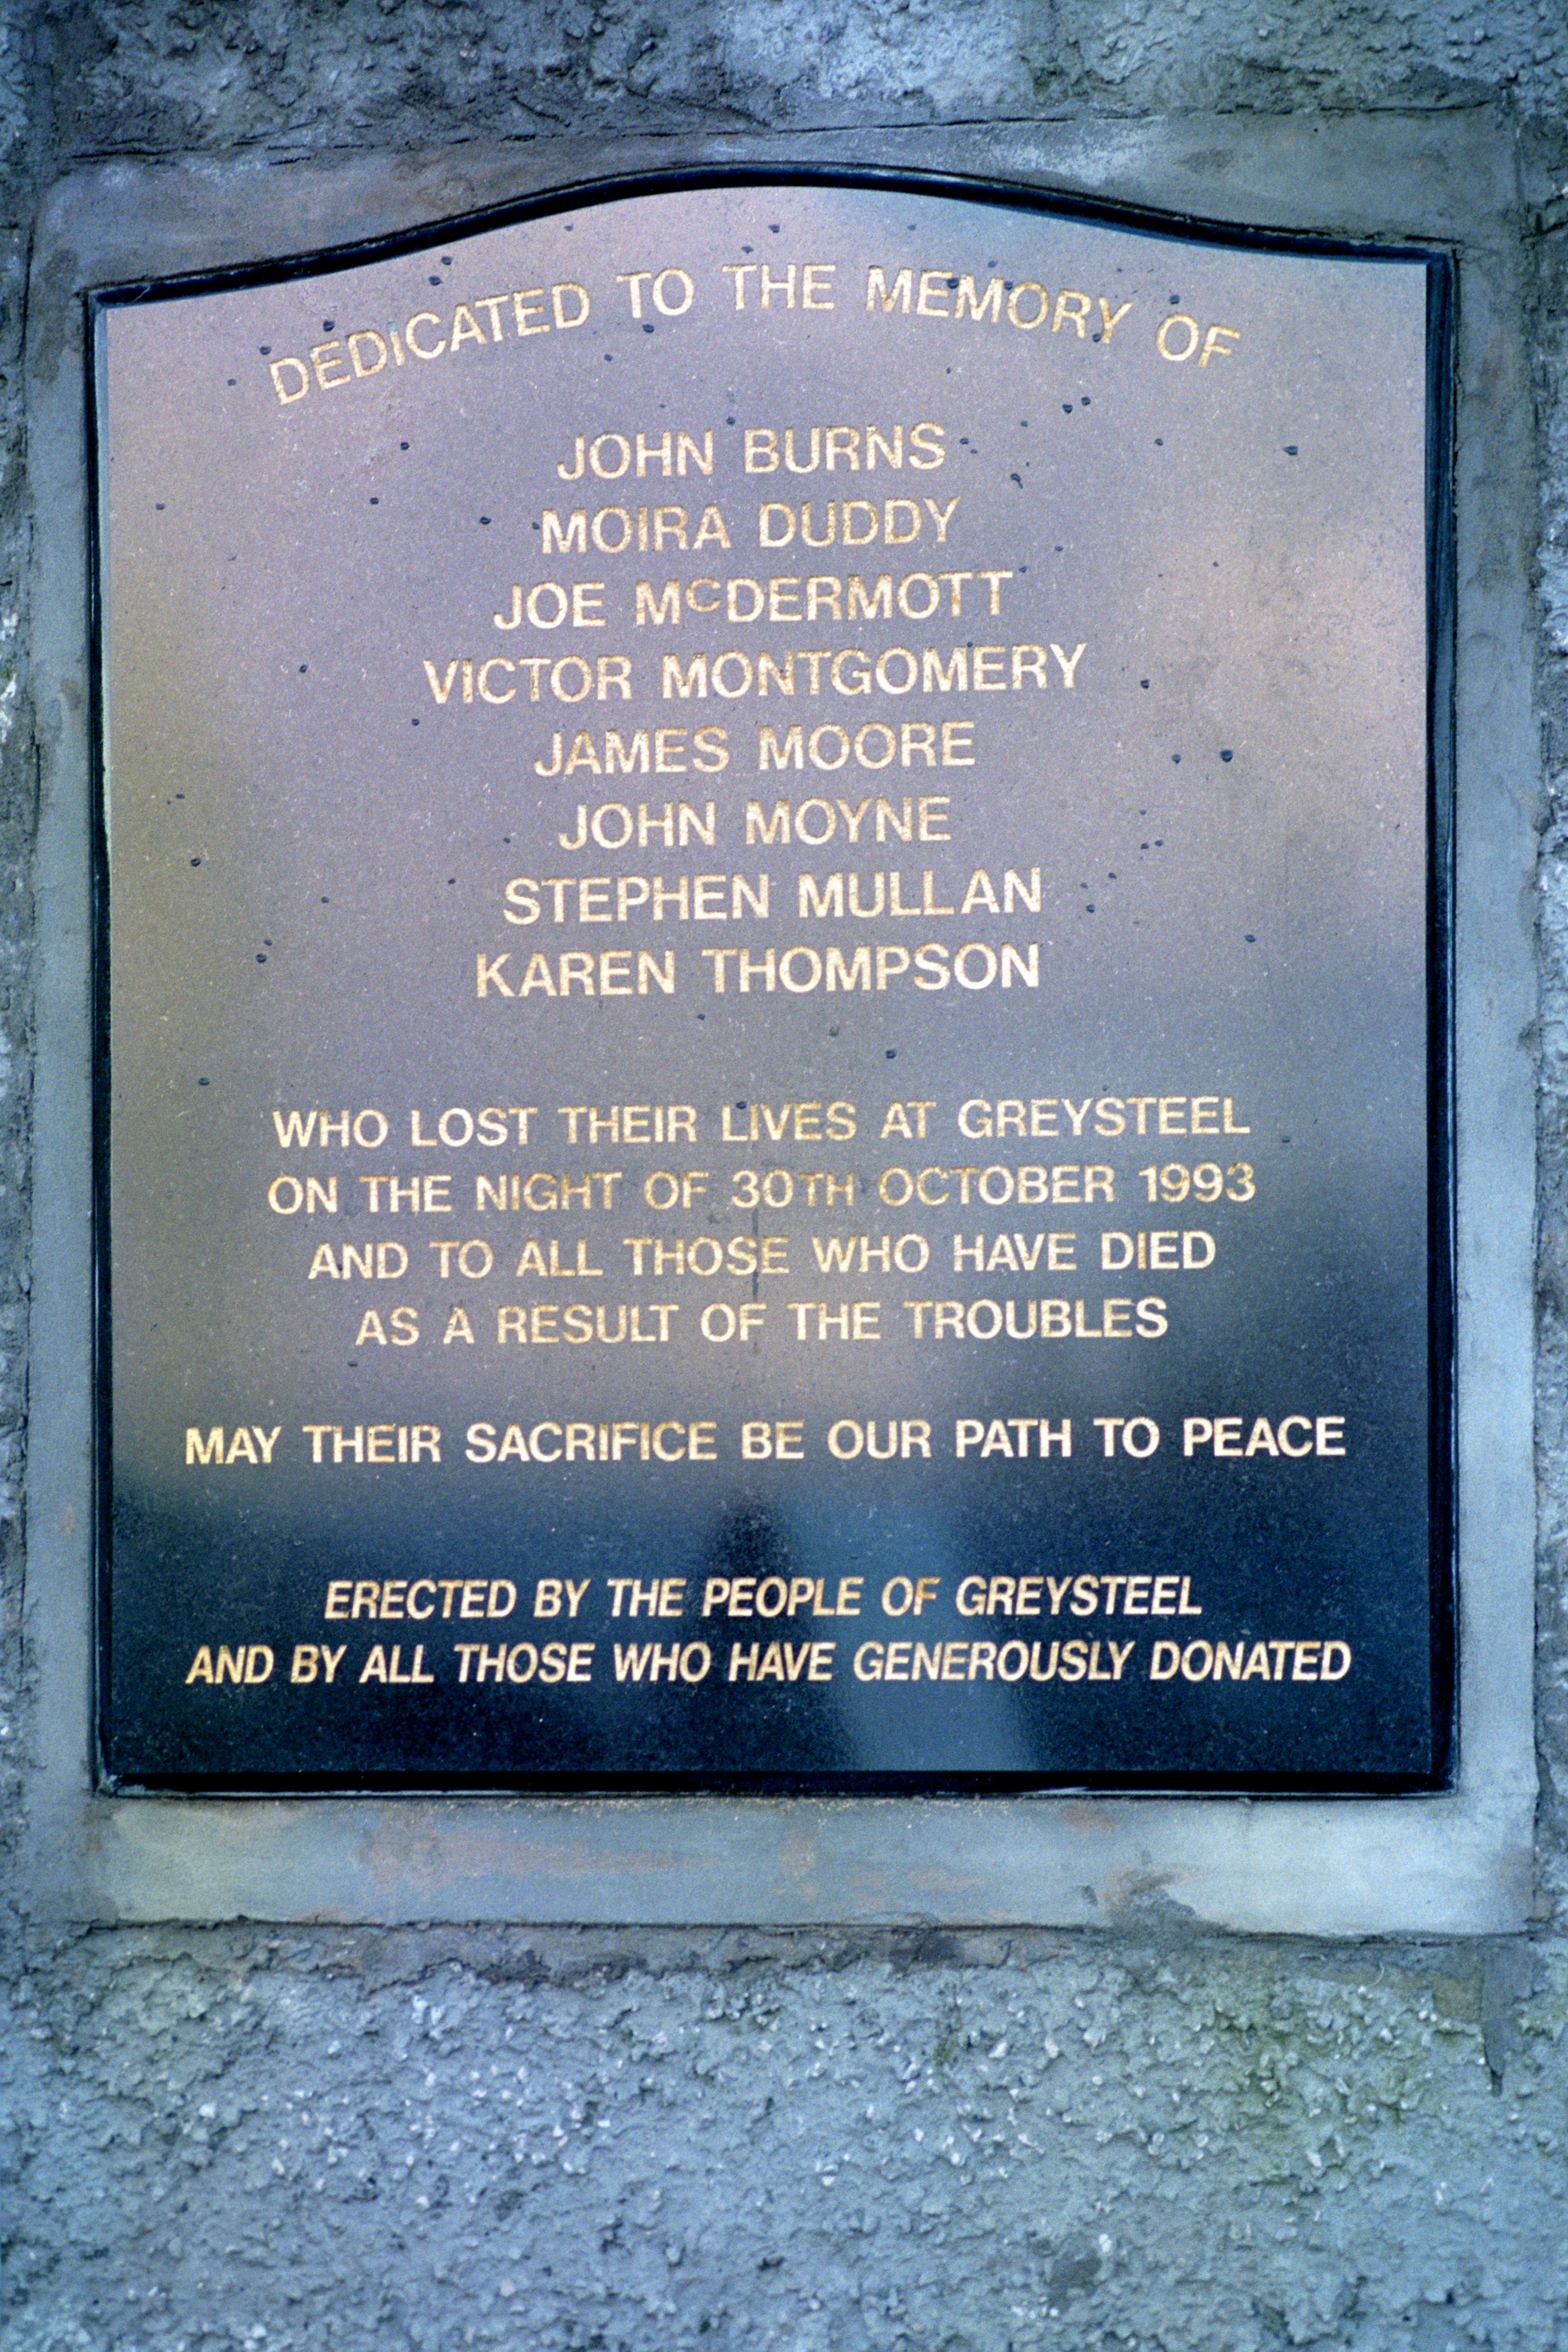 A memorial stone erected near the scene of the Greysteel massacre (PA)